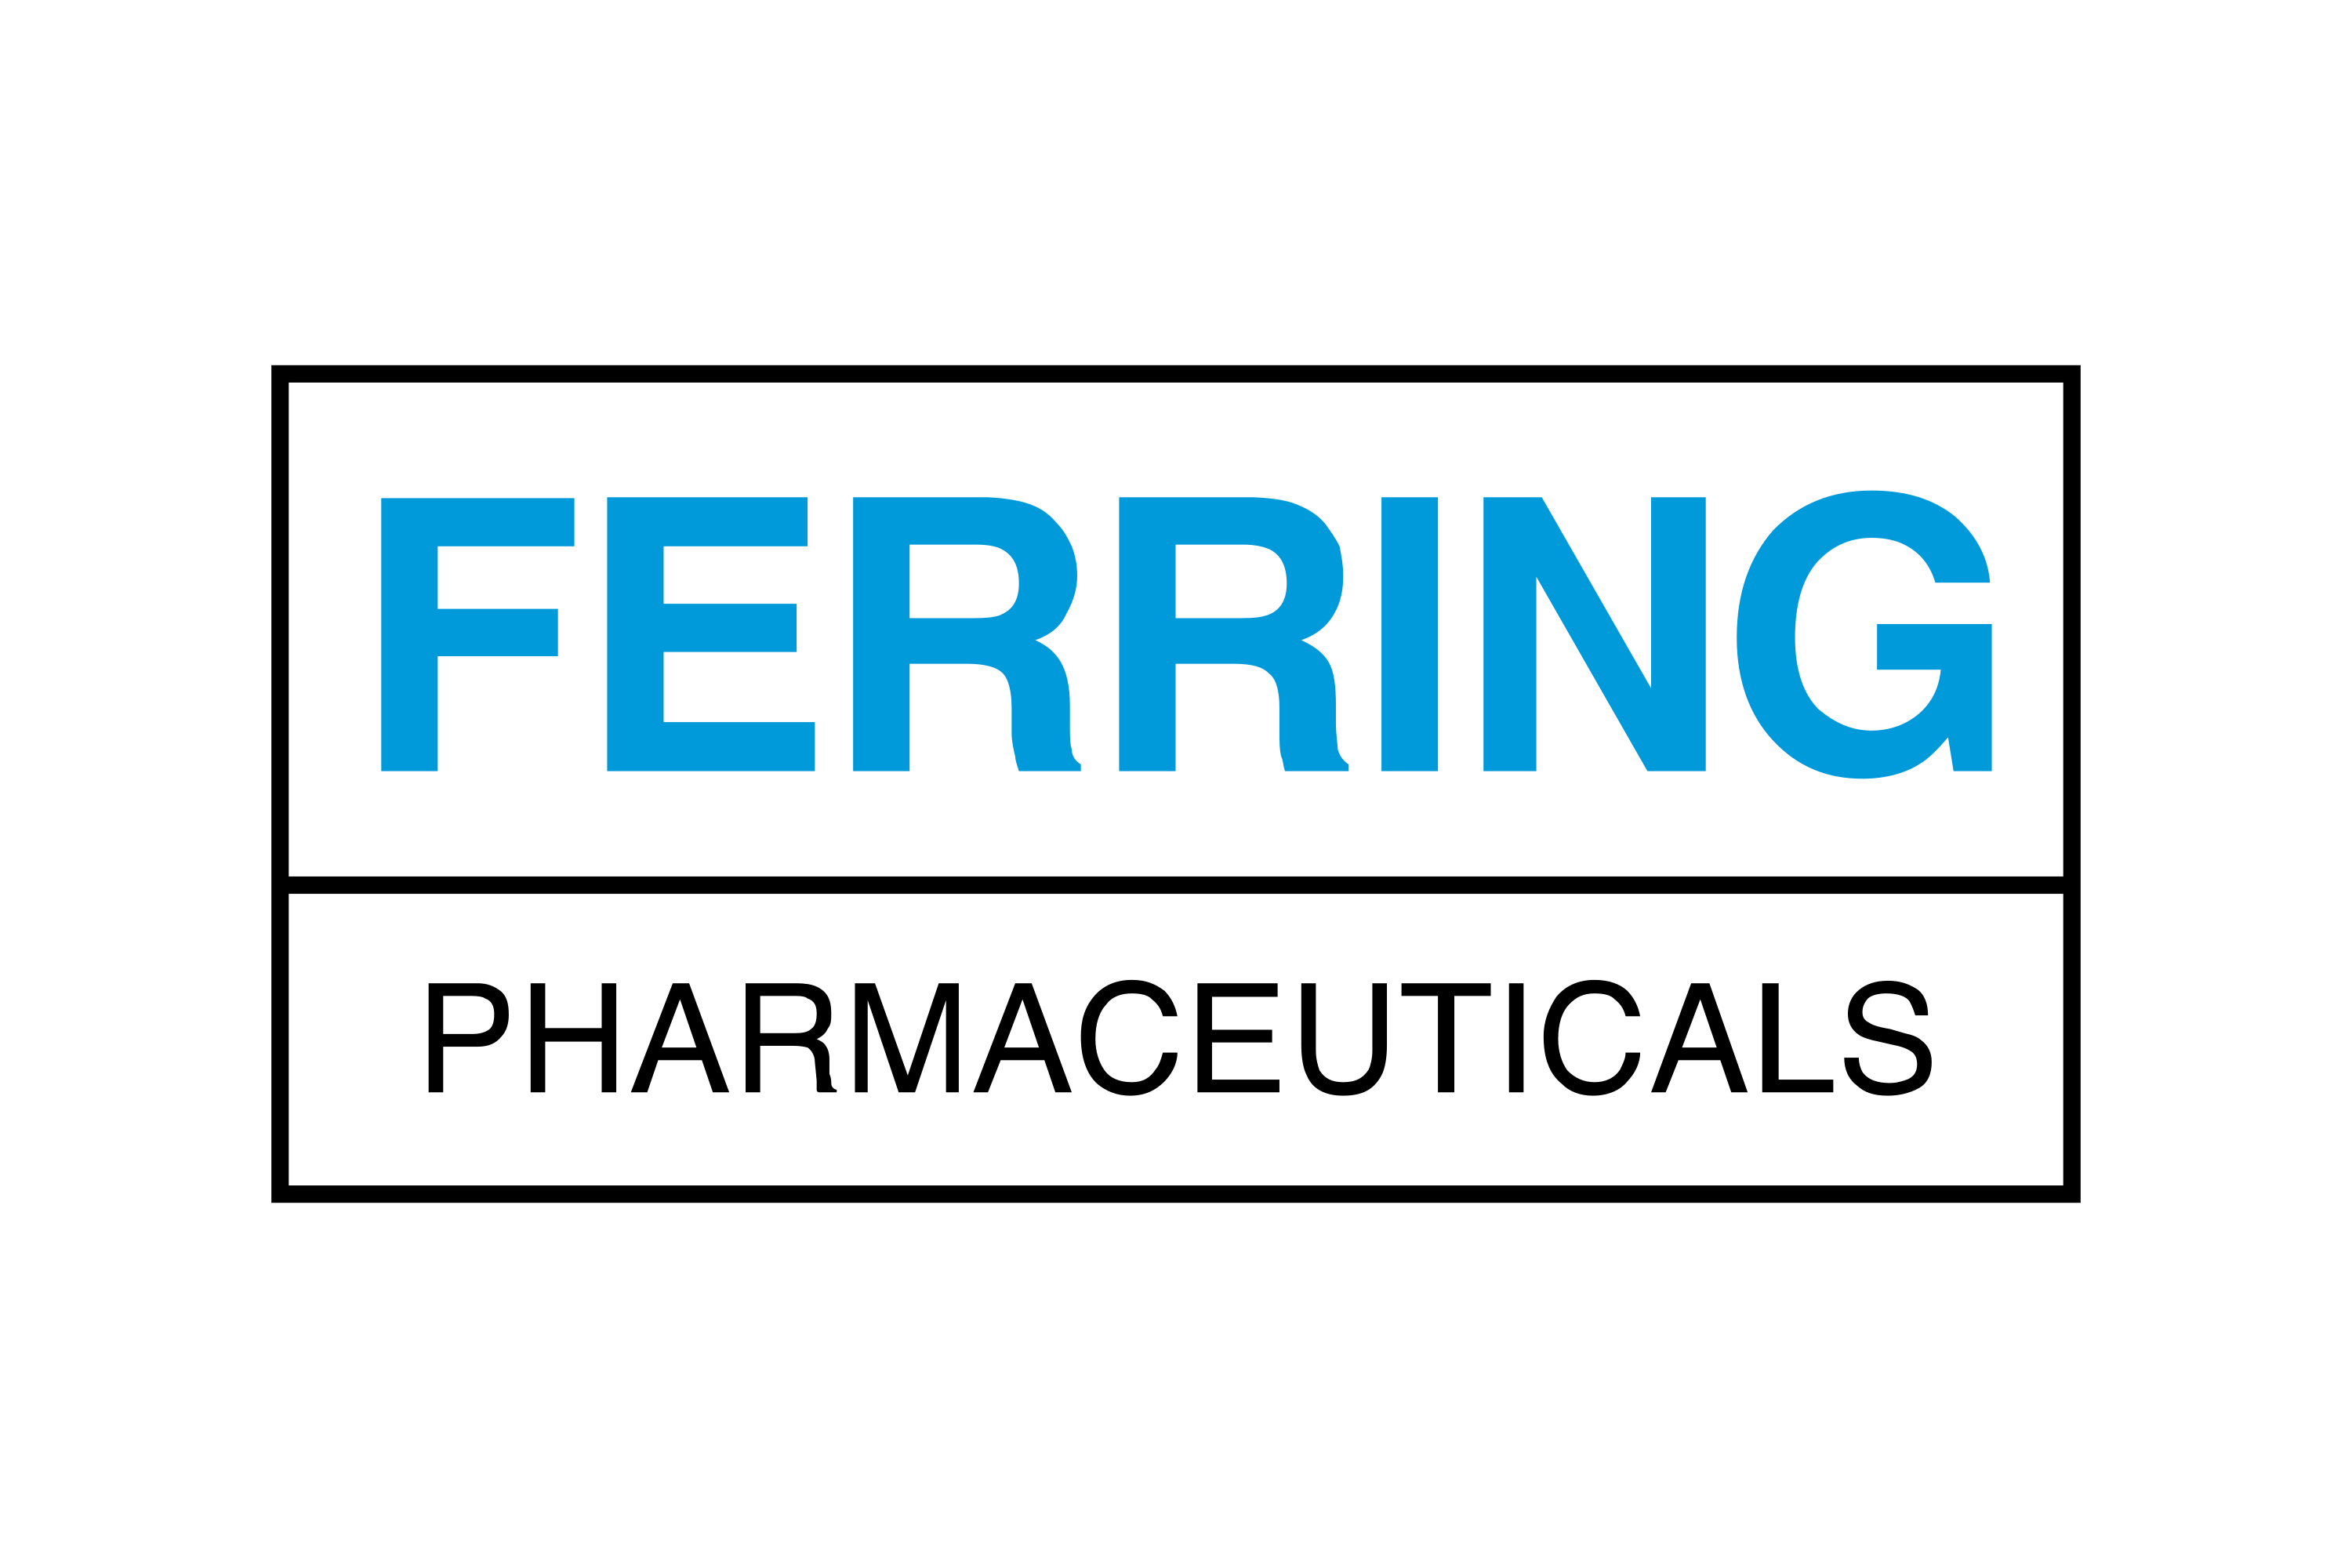 Download Ferring Pharmaceuticals Logo in SVG Vector or PNG File Format